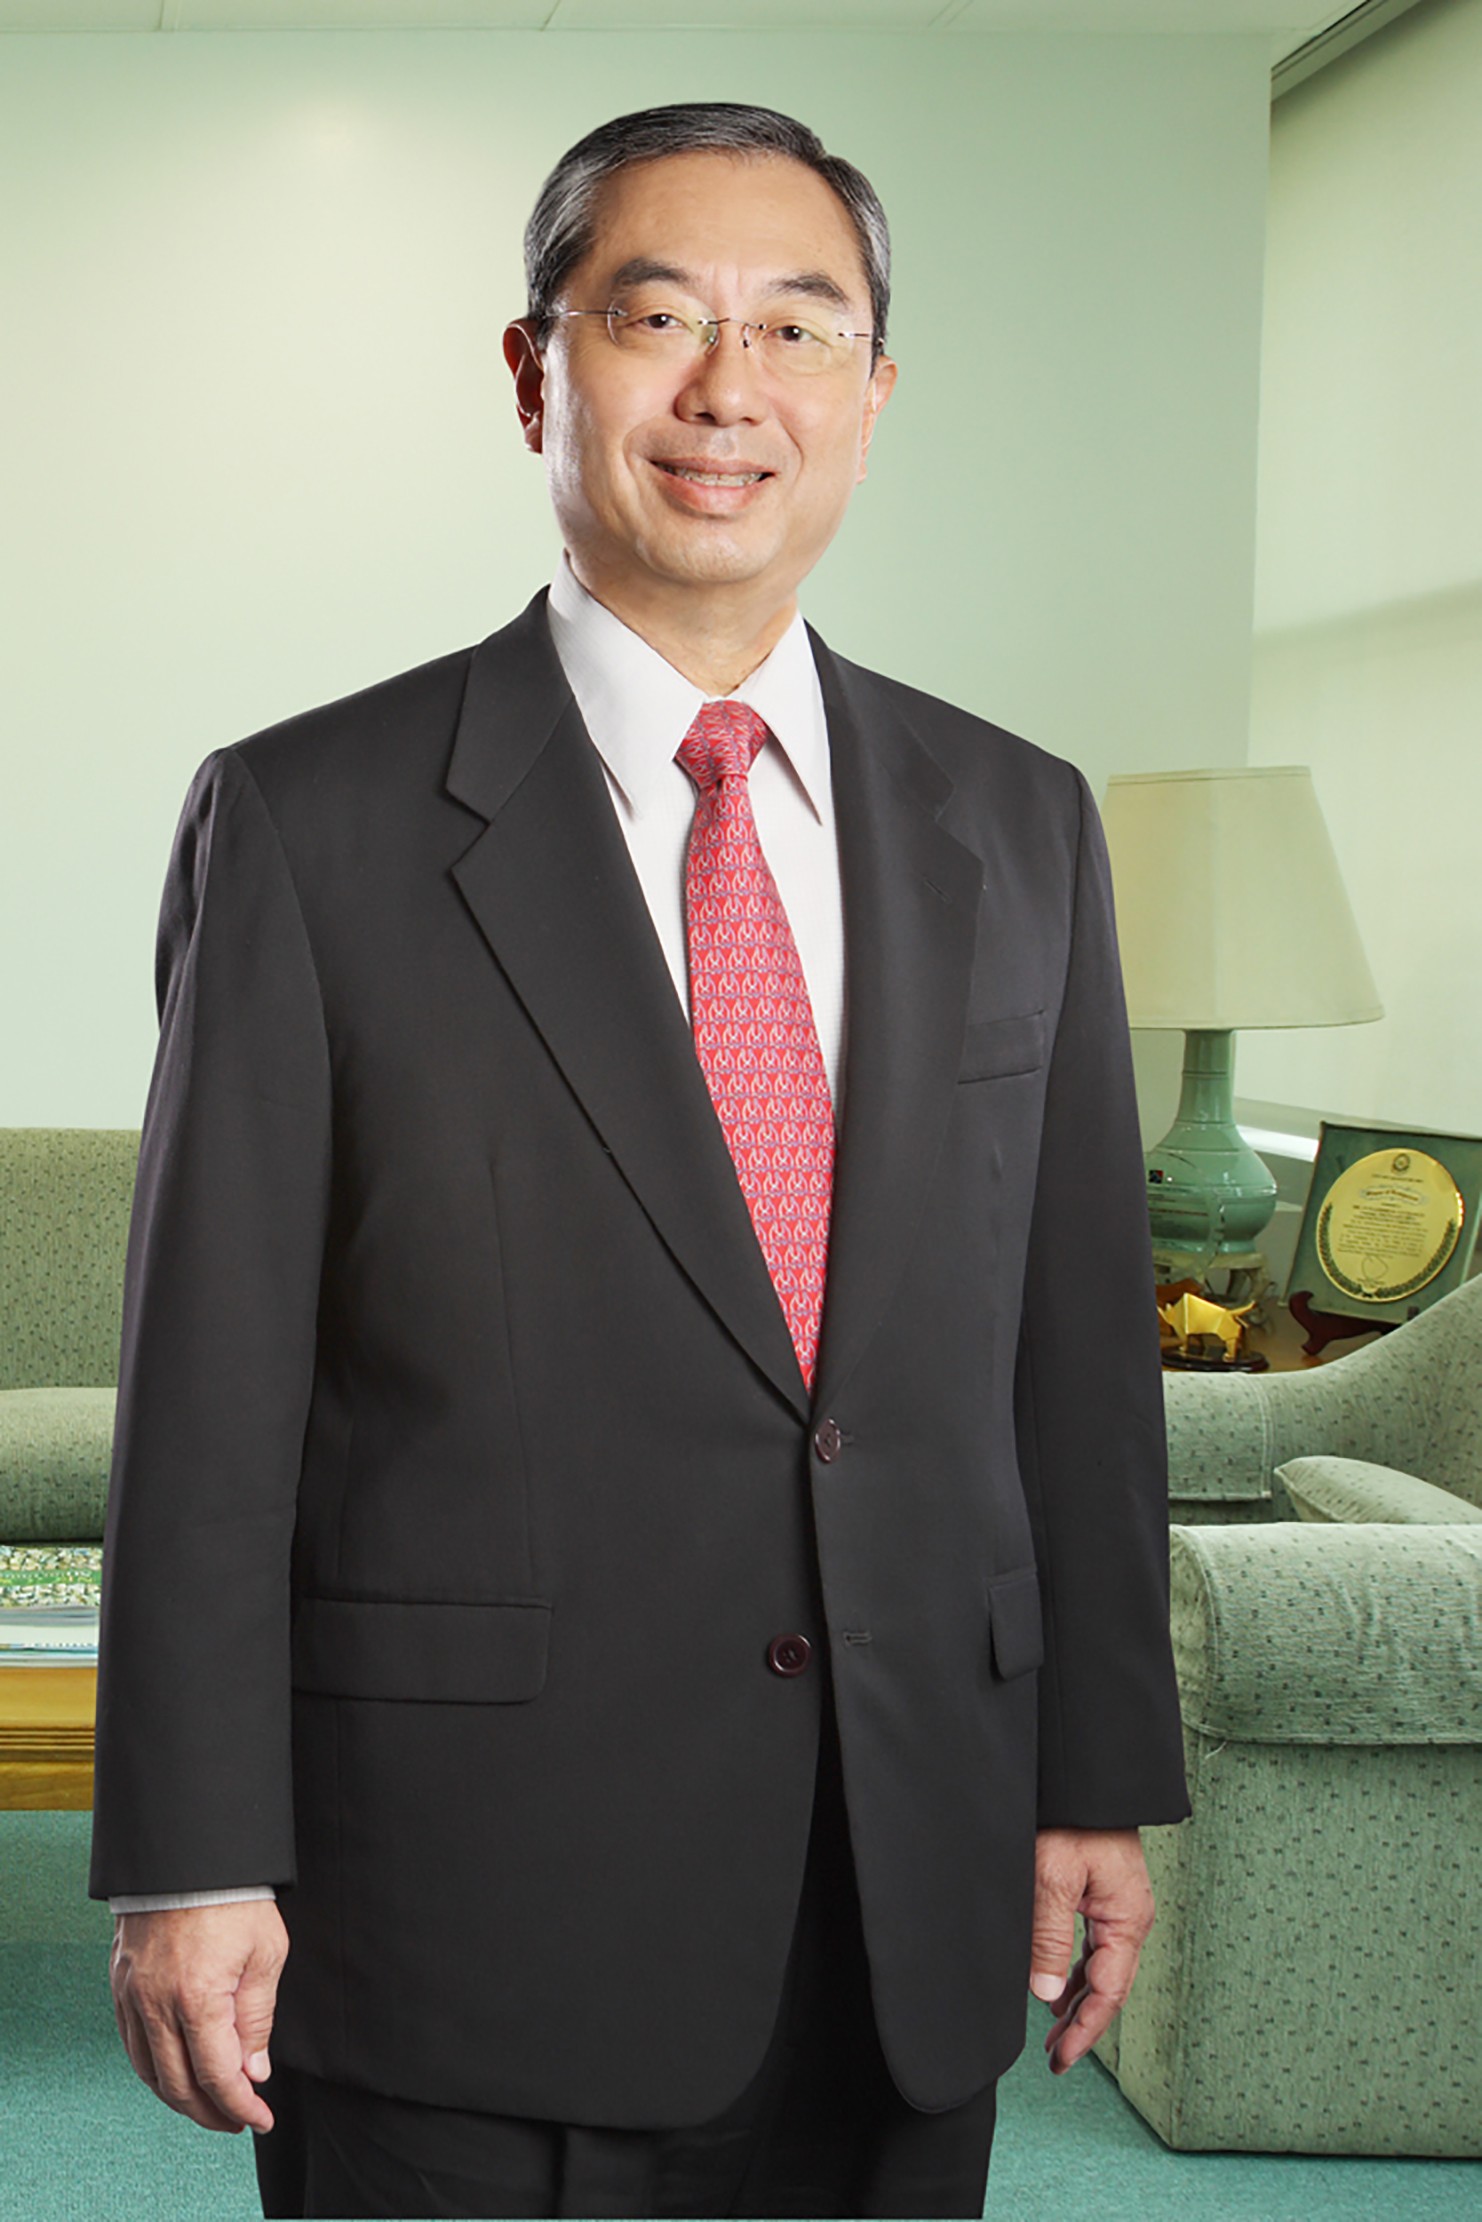 Guillermo Luchangco, chairman and CEO